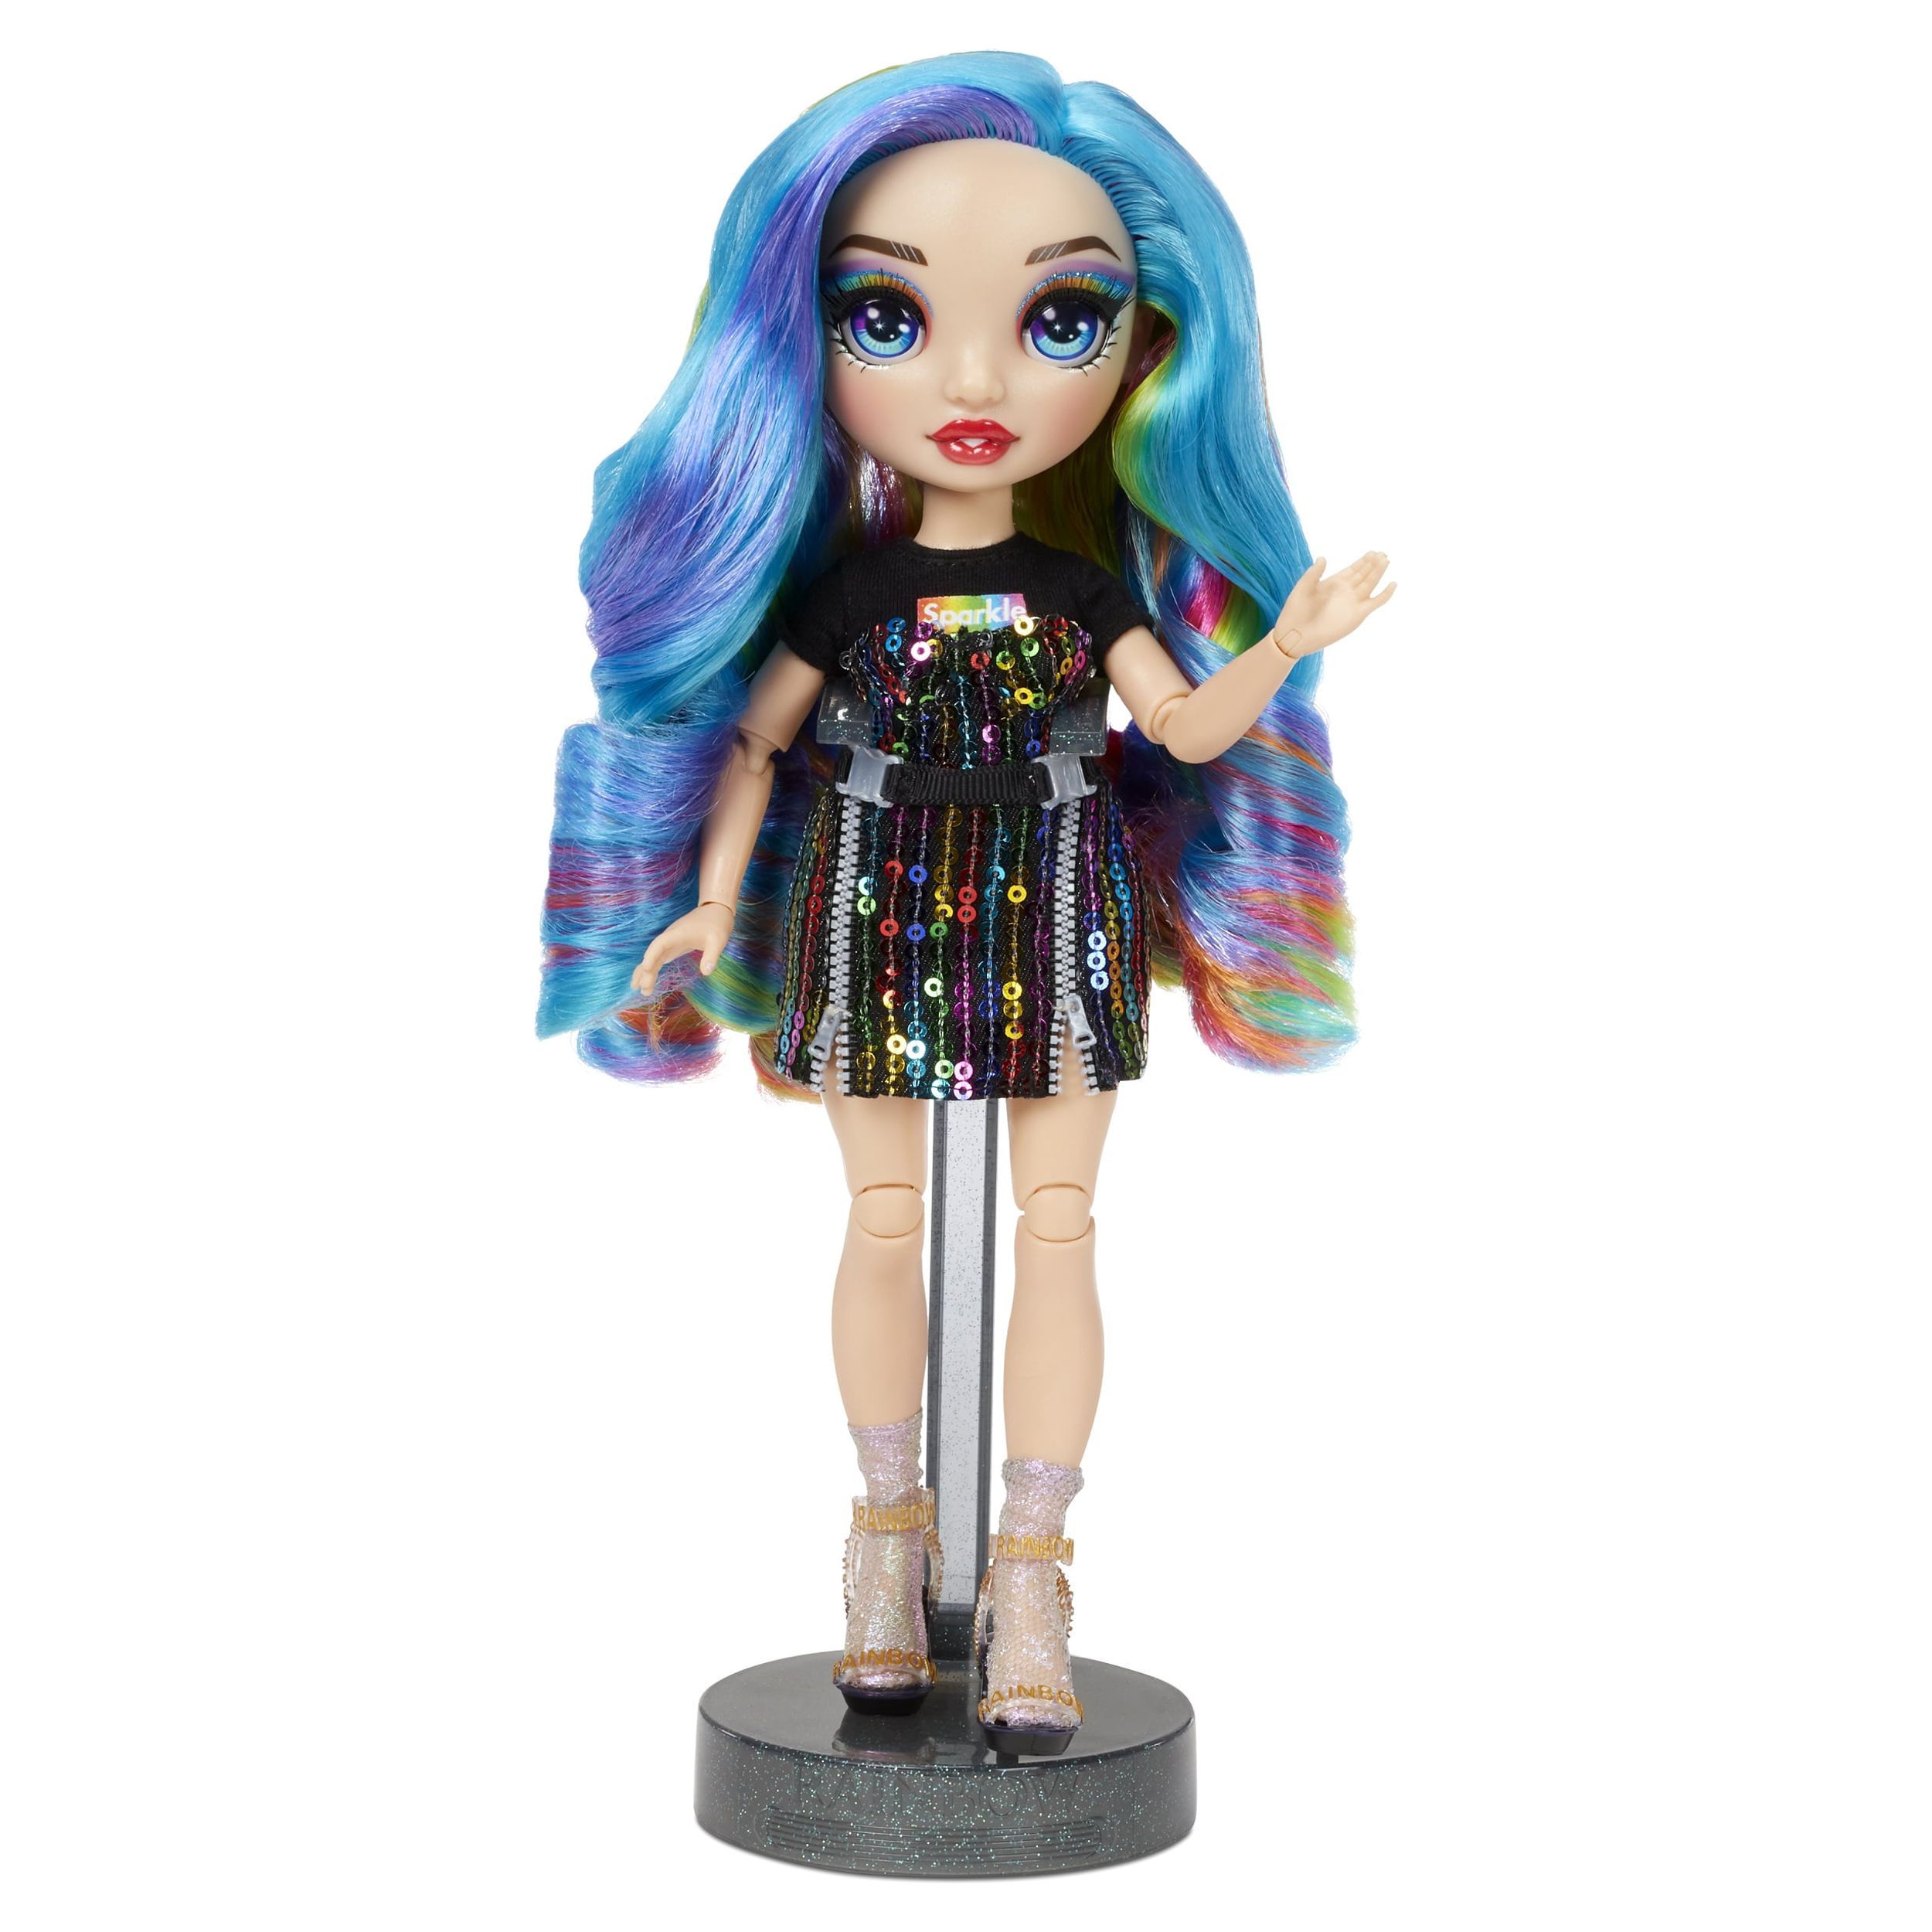 Rainbow High Amaya Raine – Rainbow Fashion Doll with 2 Complete Mix & Match Outfits and Accessories, Toys for Kids 6-12 Years Old - image 5 of 8